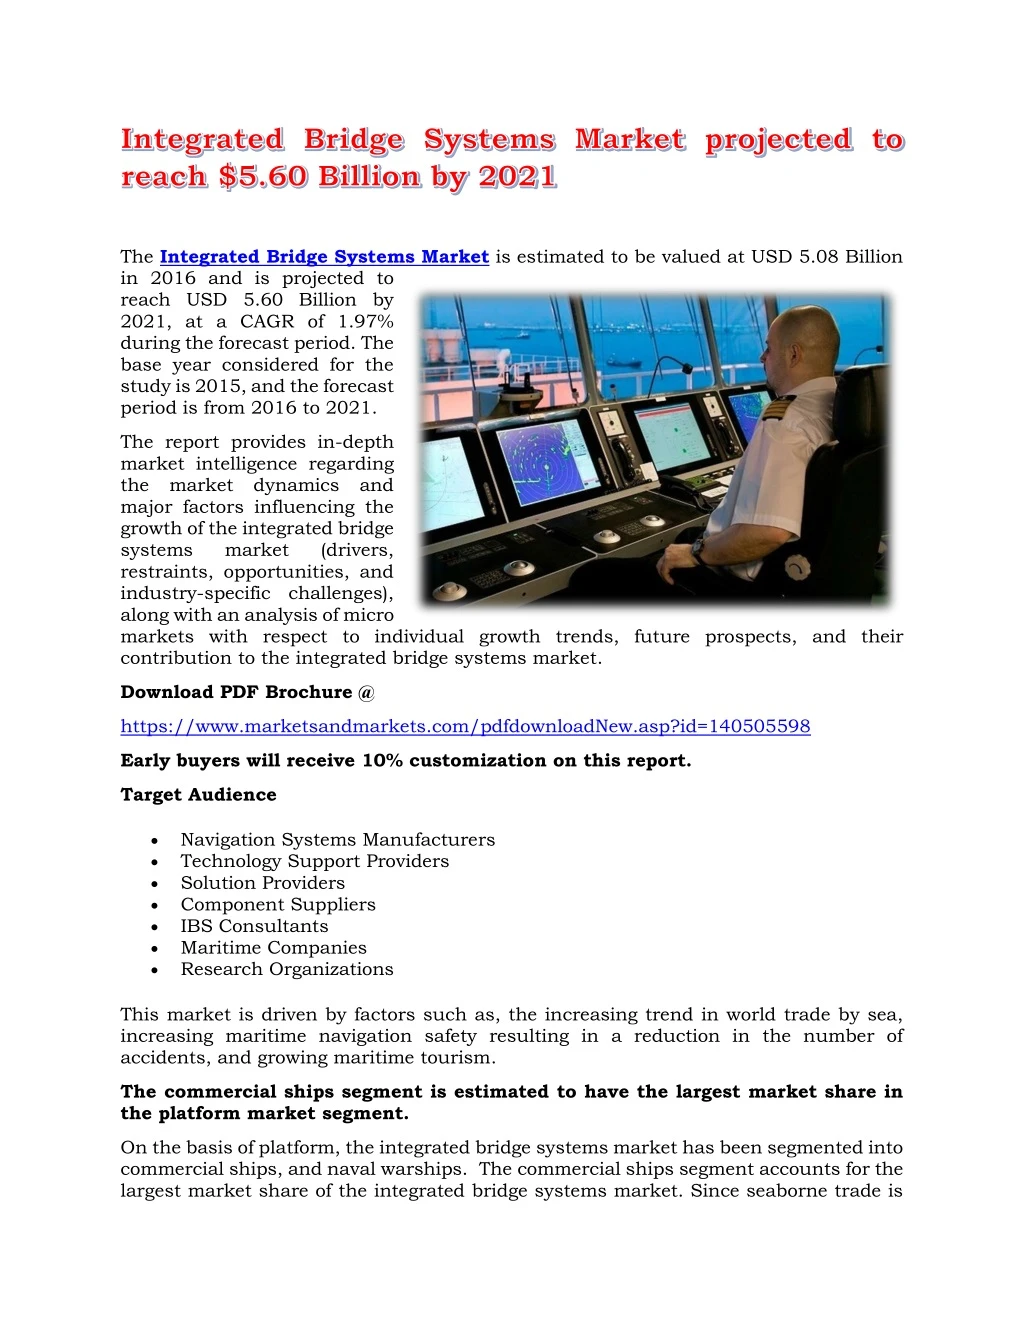 the integrated bridge systems market is estimated